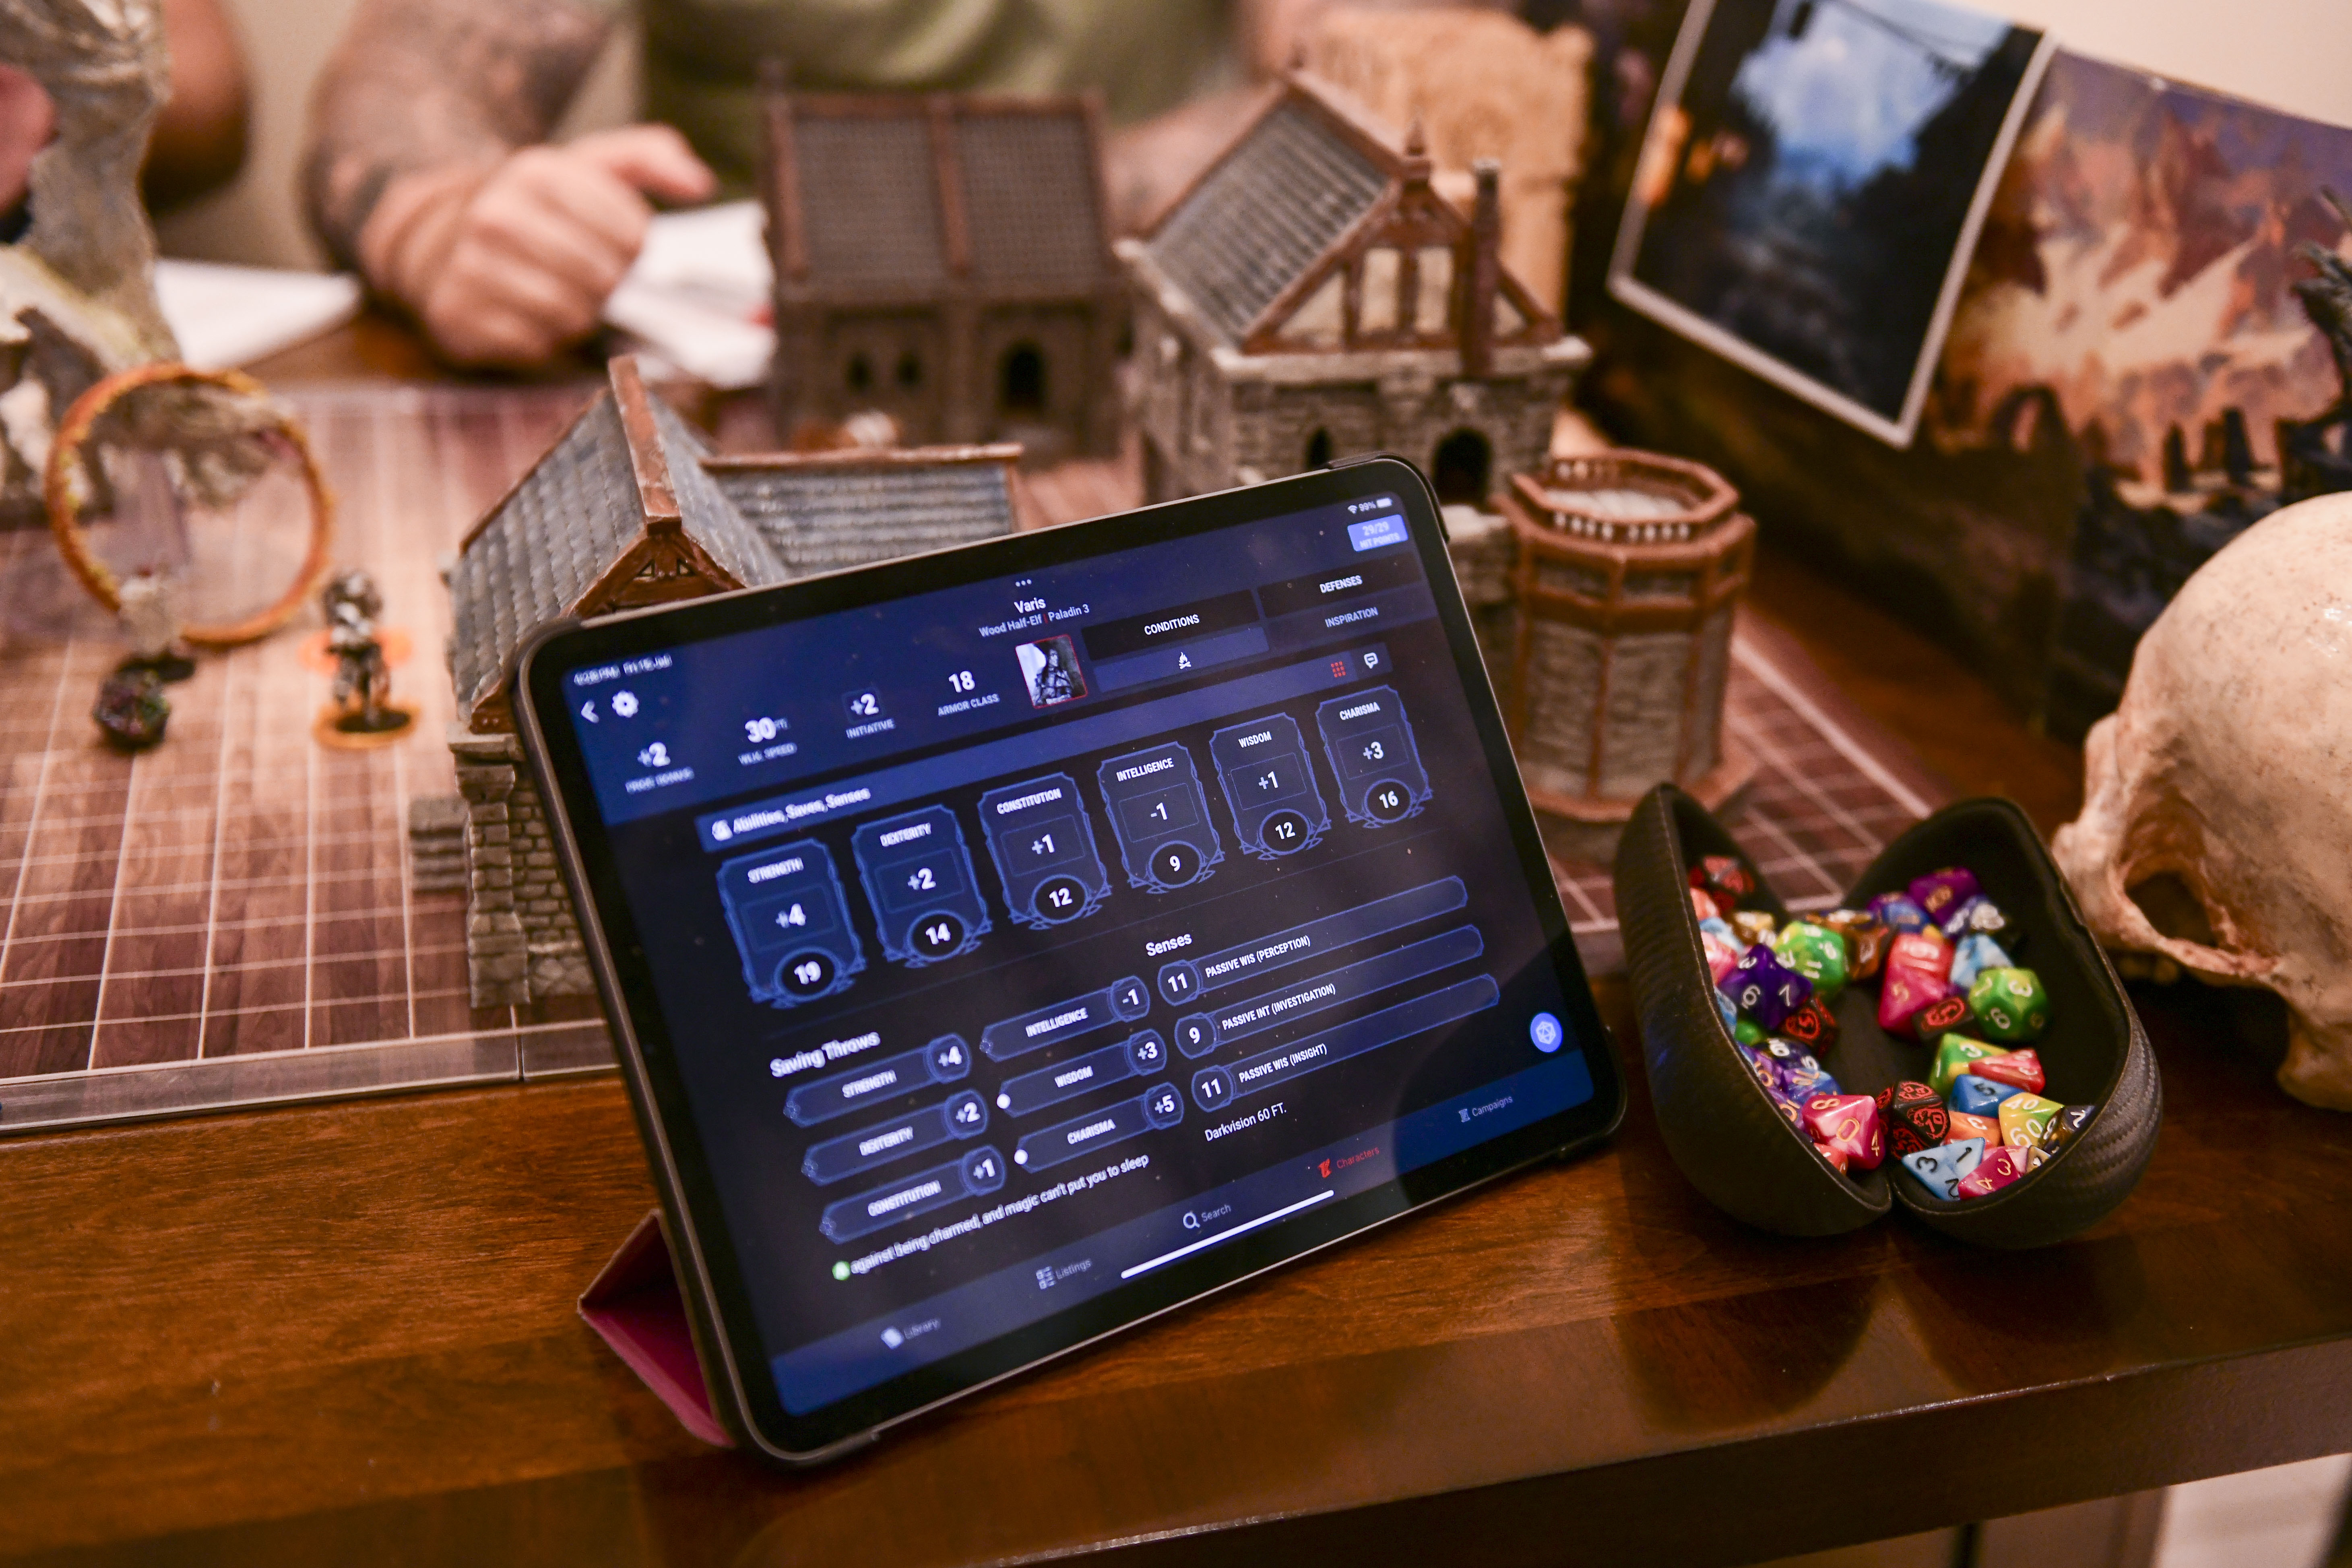 Players around the world can also join the game through Zoom by downloading the application D&D Beyond.